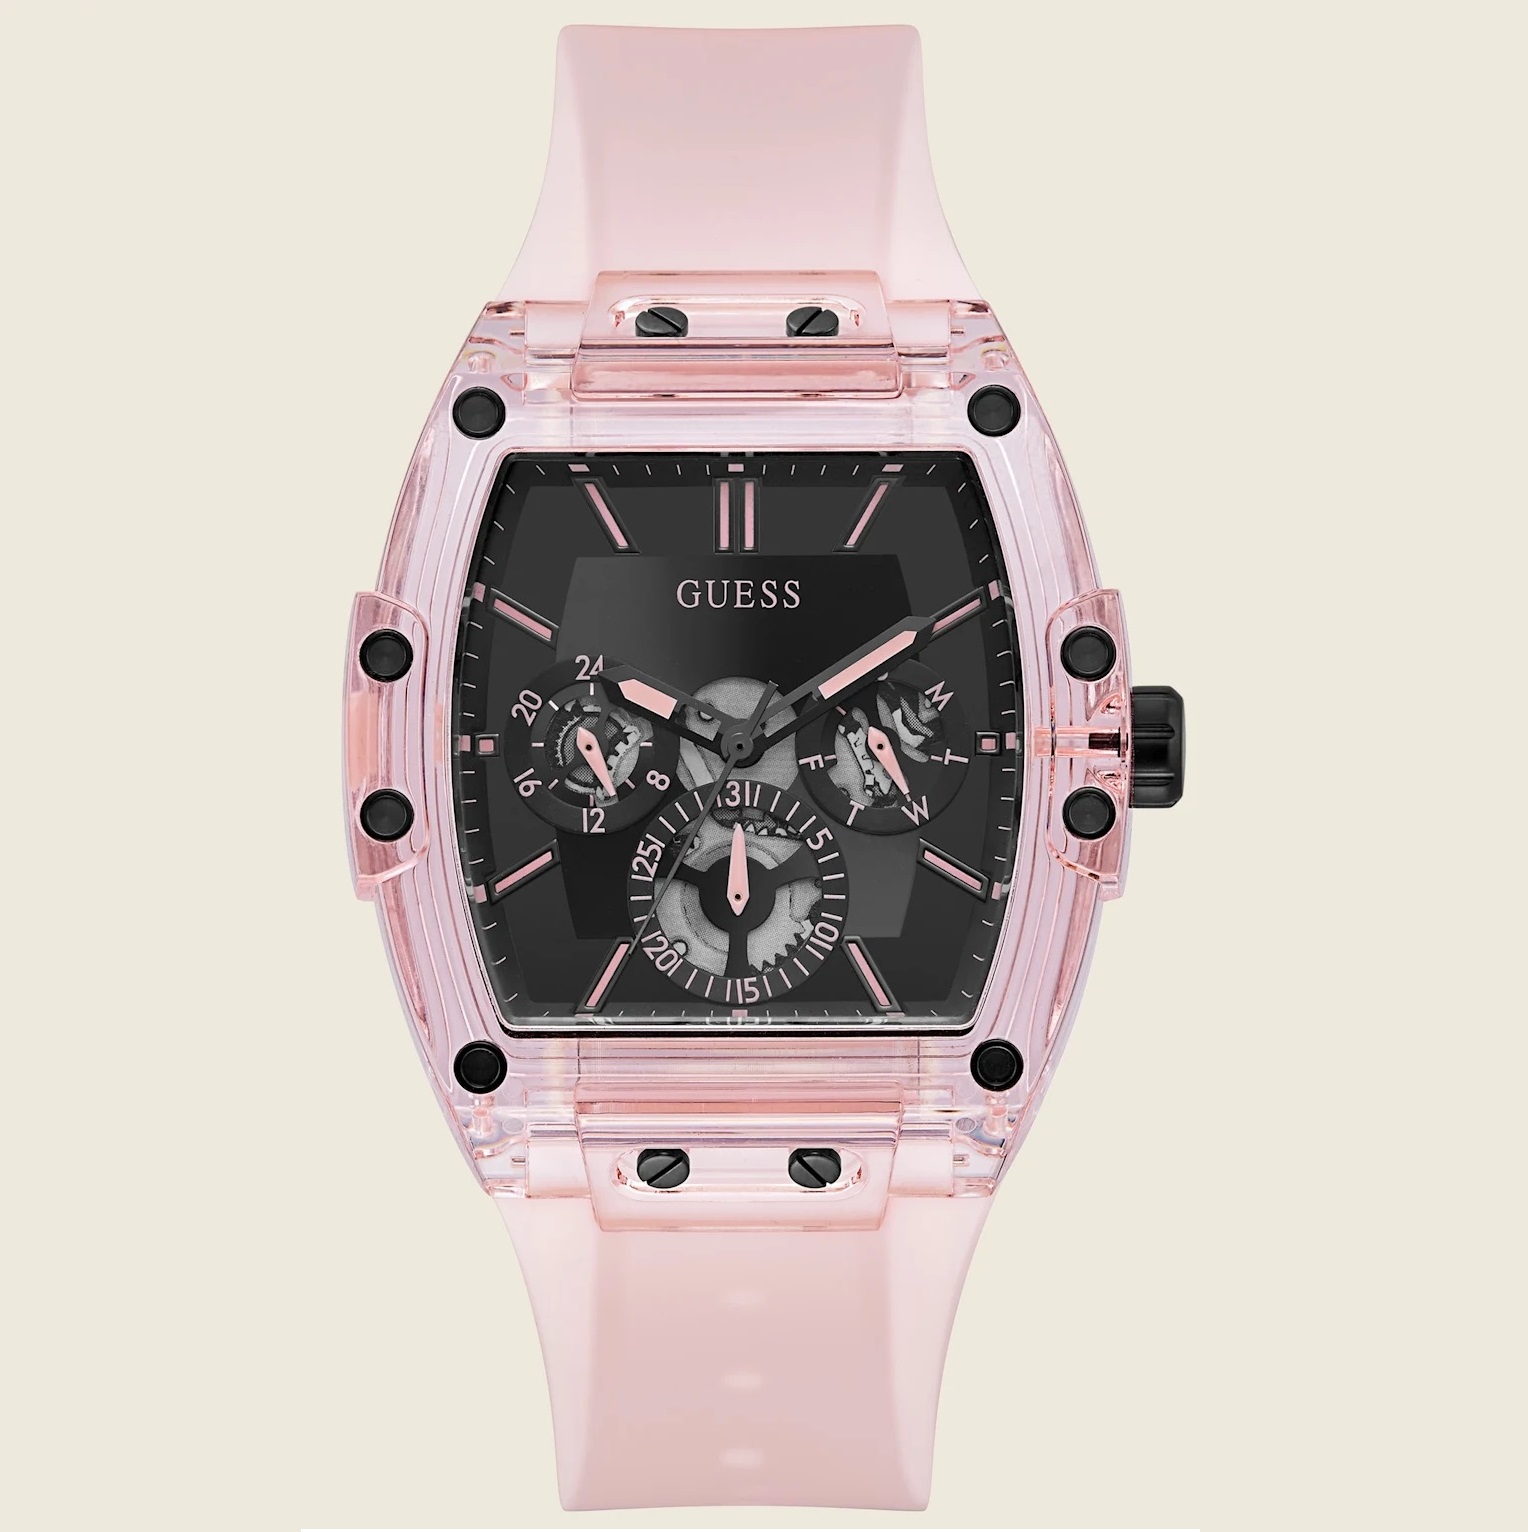 ĐỒNG HỒ ĐEO TAY GUESS PINK MULTIFUNCTION WATCH GW0203G11 5